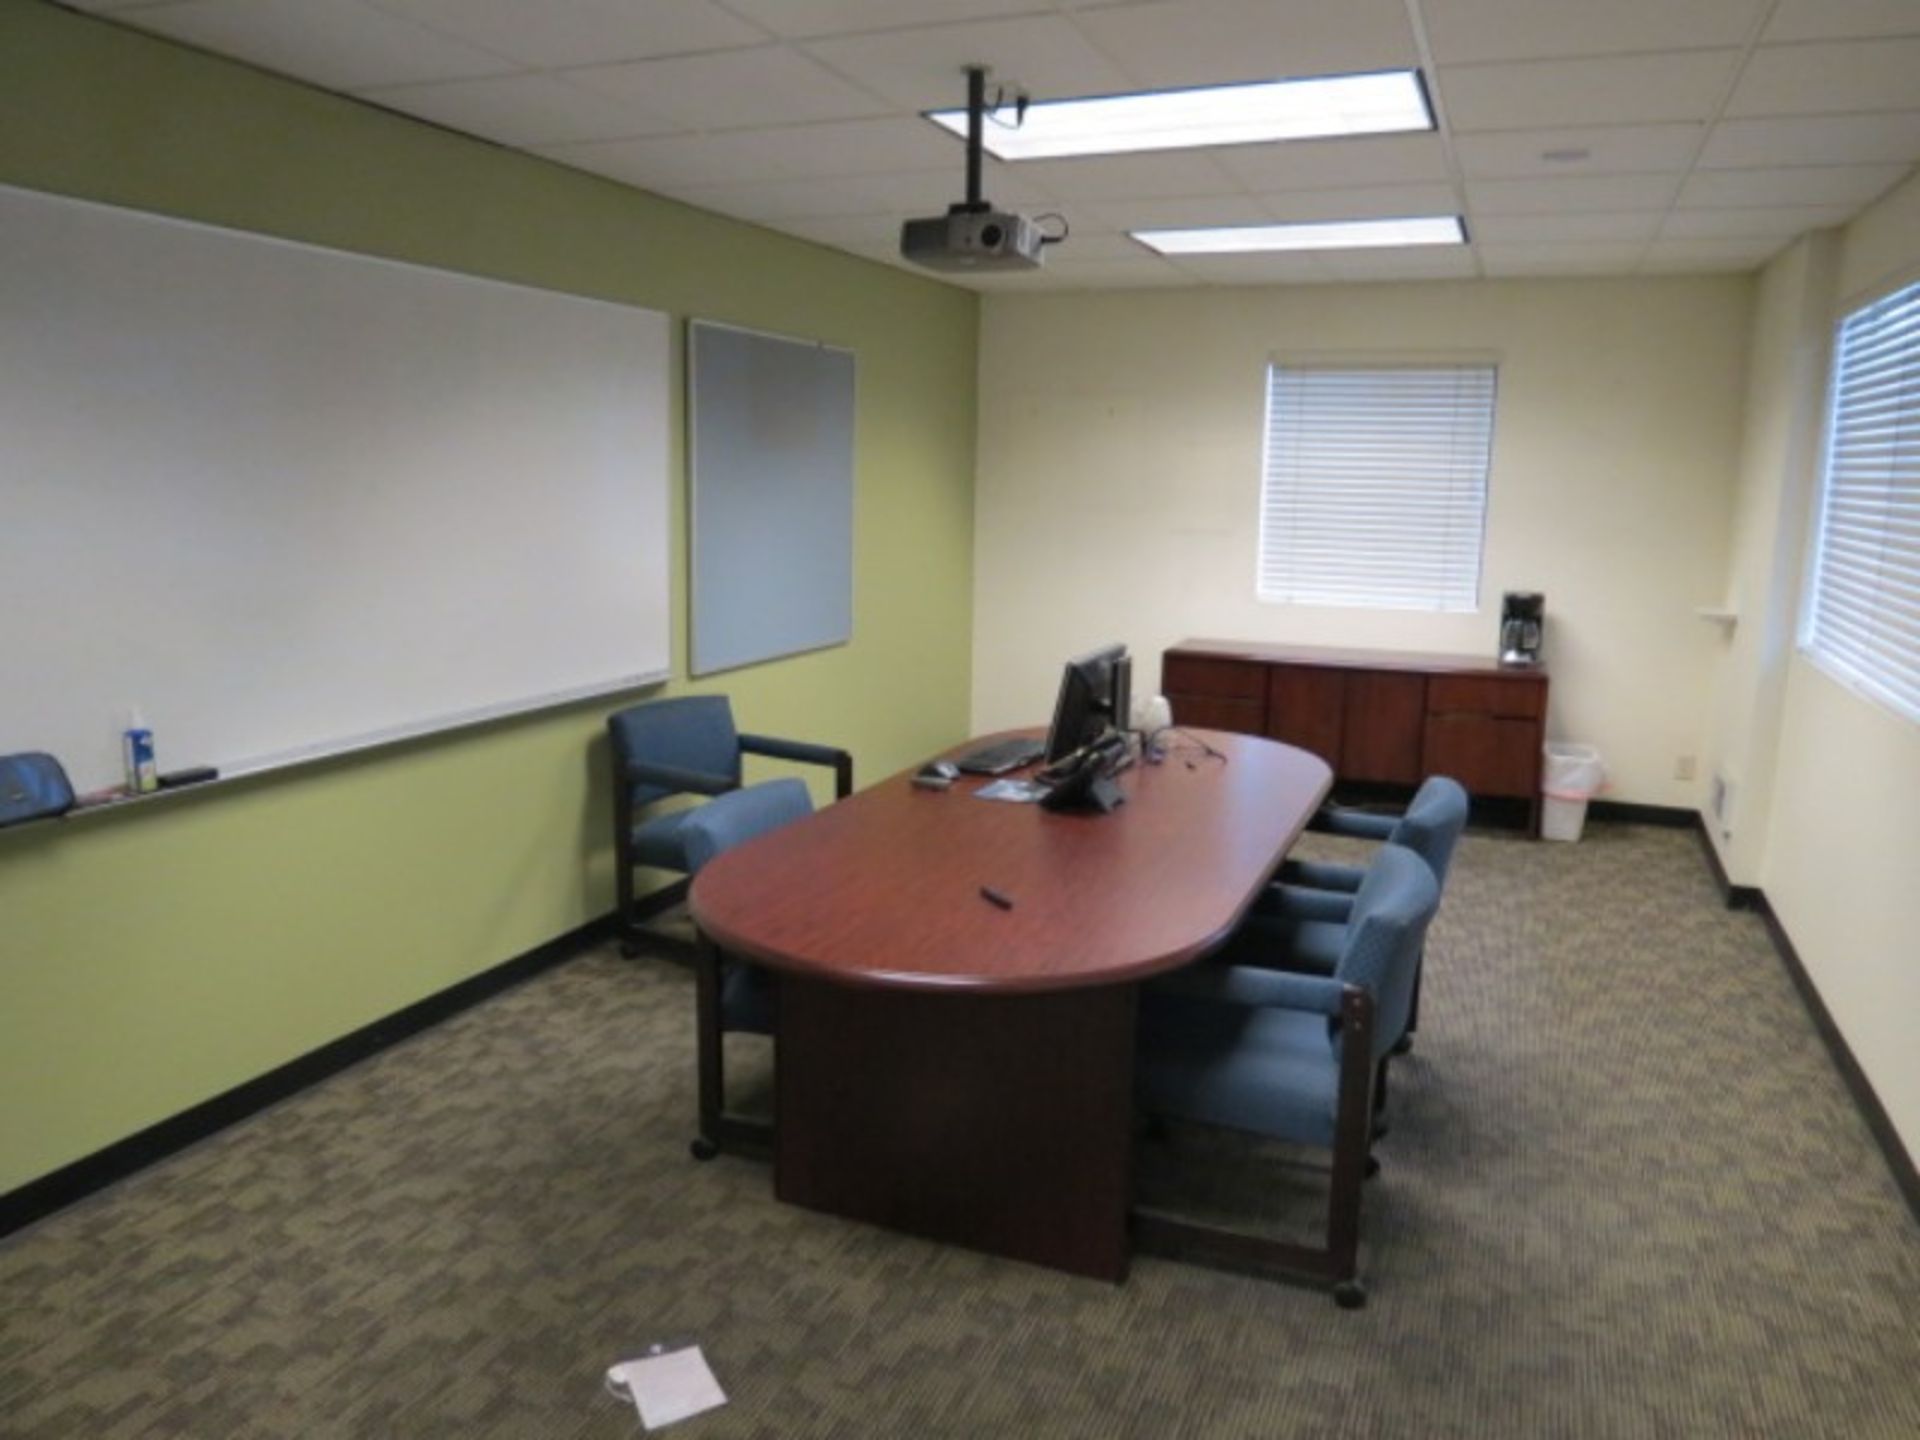 Room Content, Conference Table with Chairs & Projector